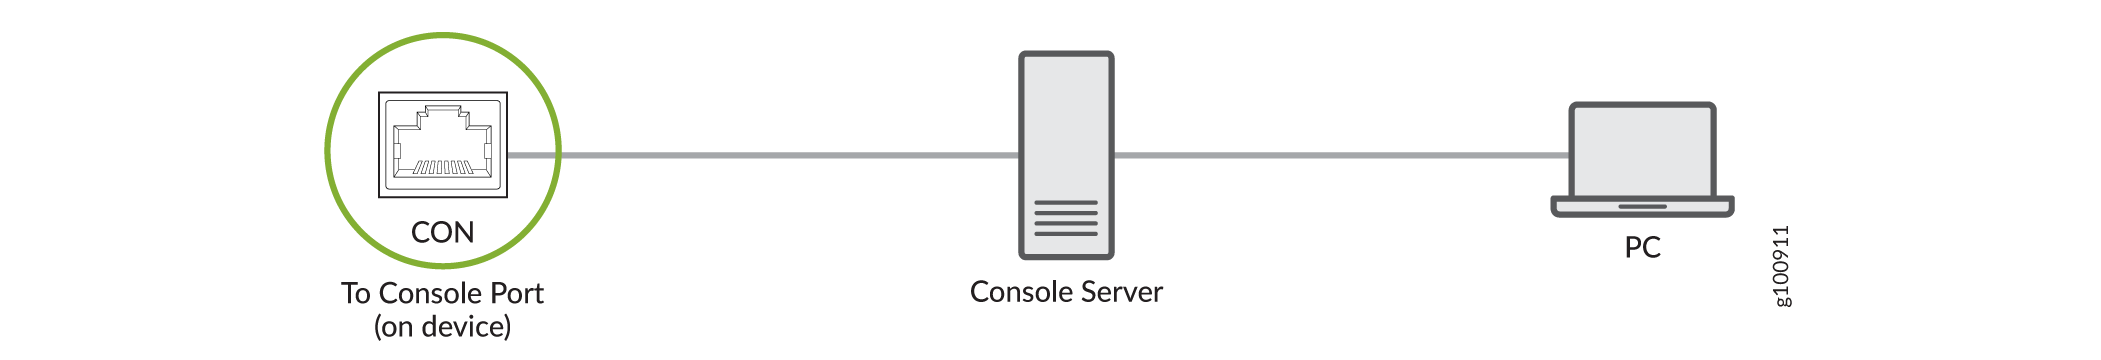 Connect the PTX10004 Router to a Management Console Through a Console Server